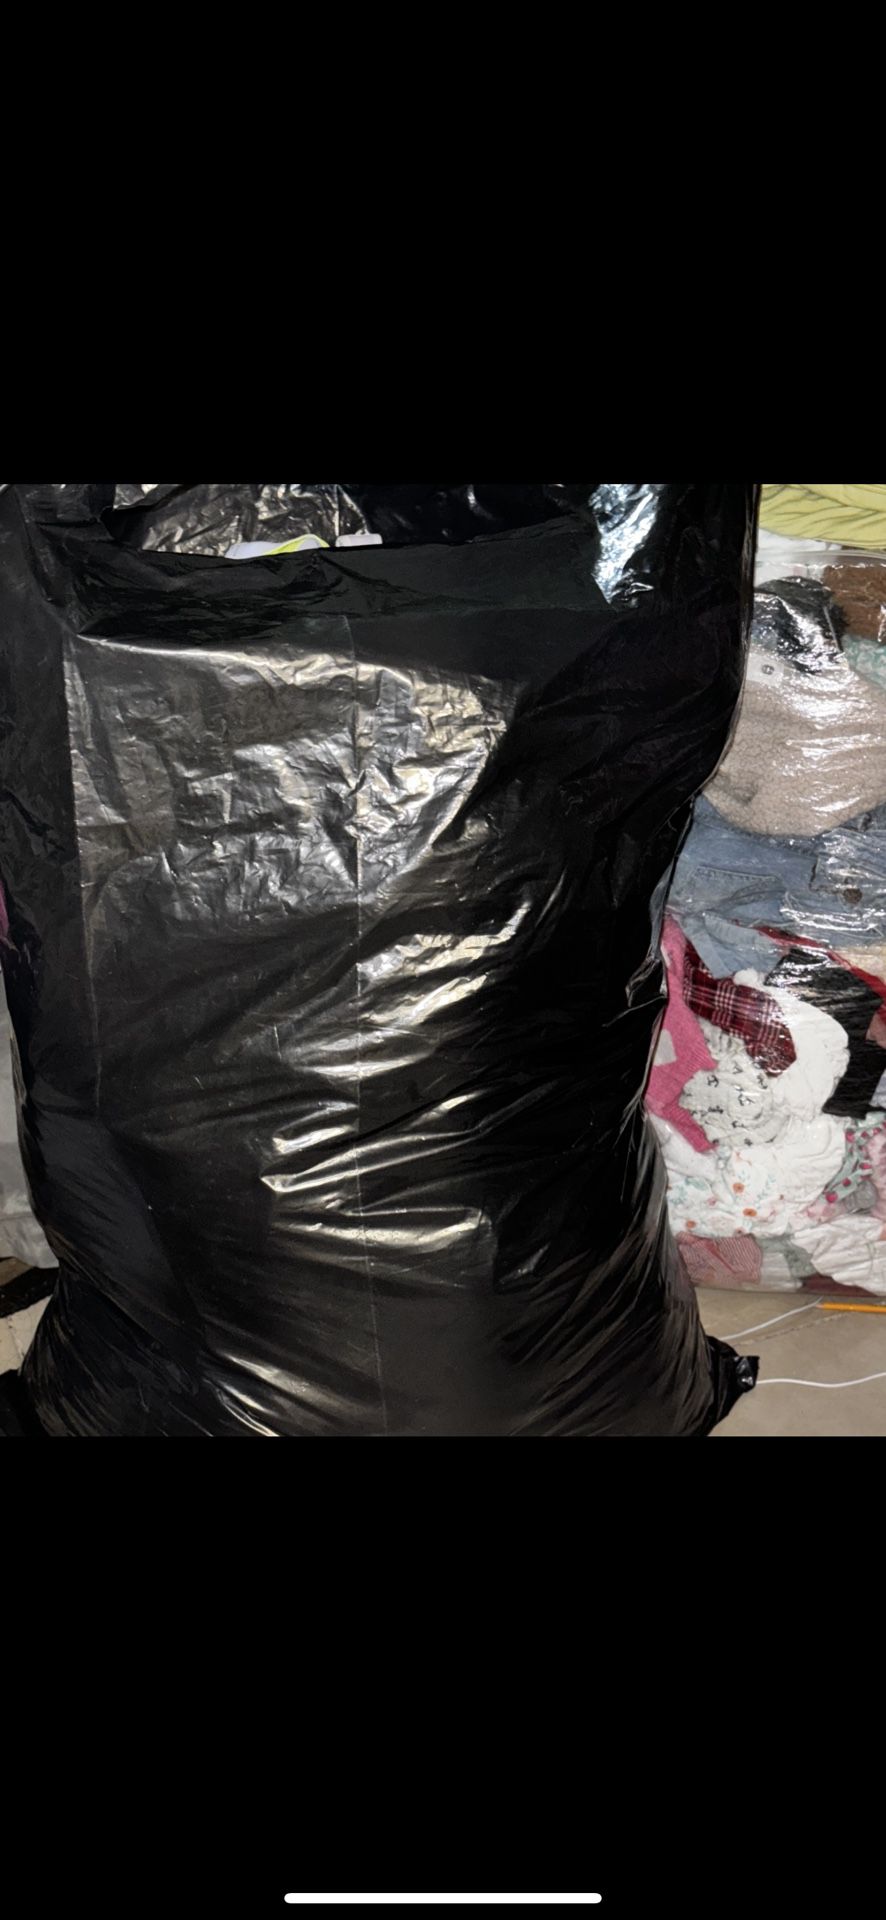 large bag with women's clothing in large, medium and small sizes, all for $25